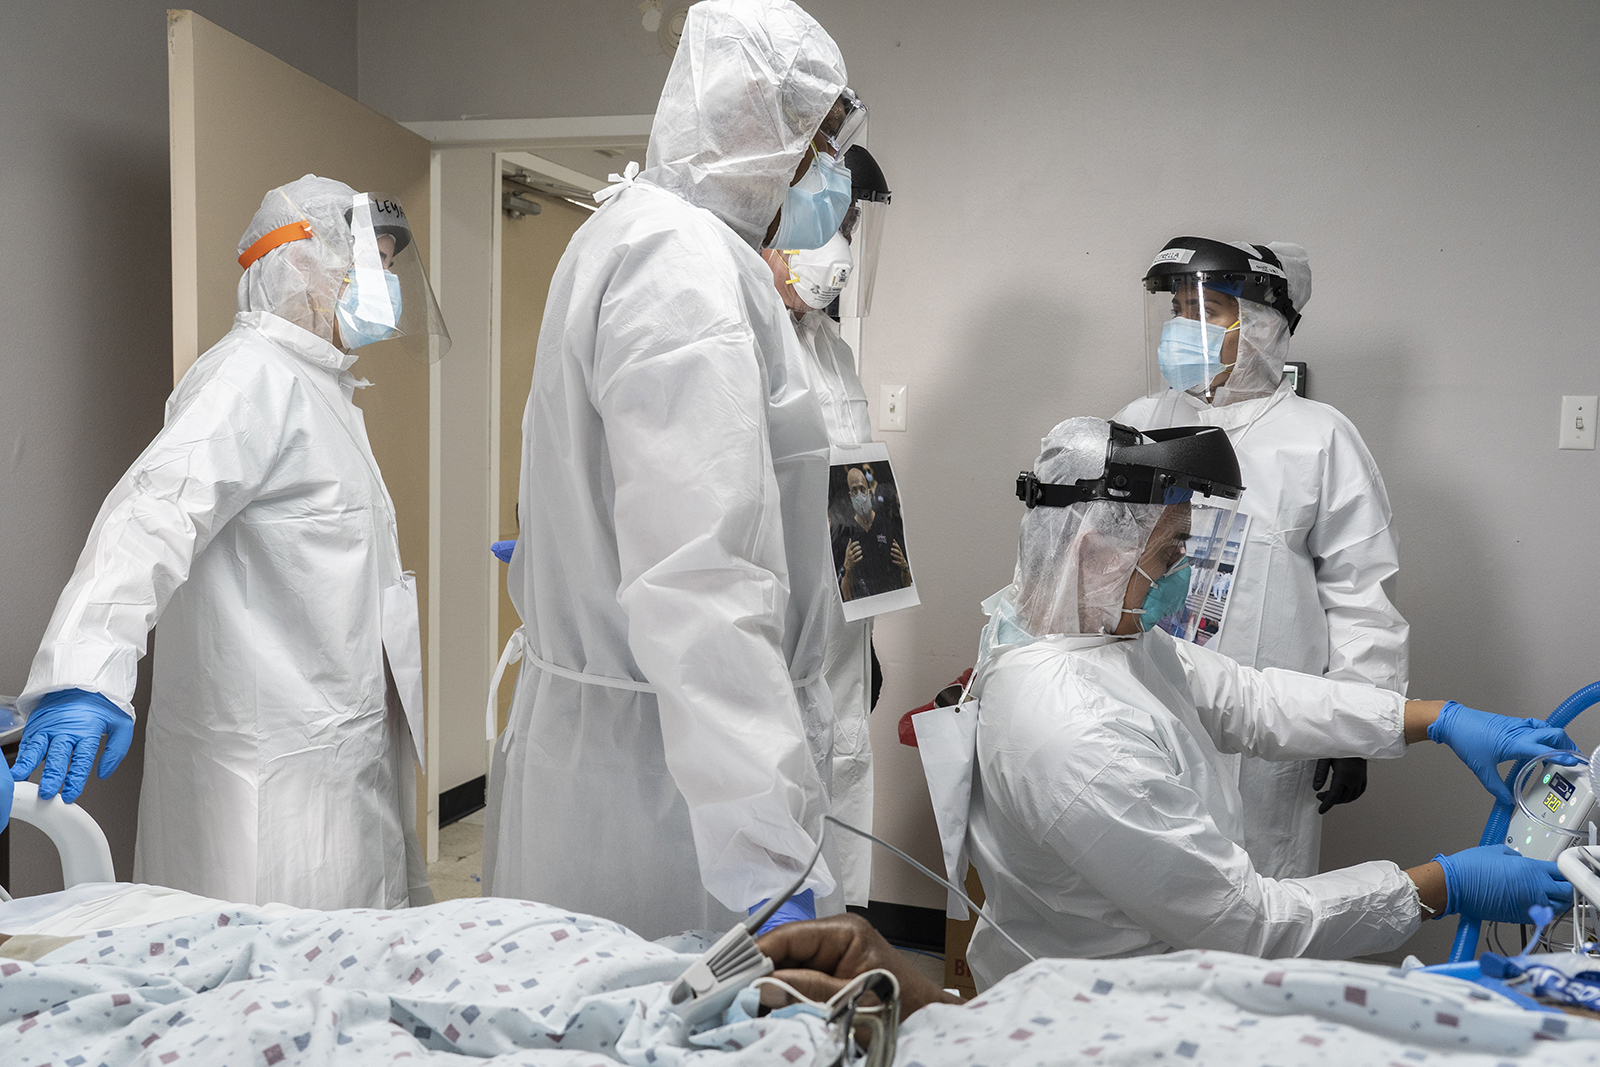 Doctors and nurses wearing protective gear treat a patient in the Covid-19 intensive care unit at a hospital in Houston, Texas on June 29.